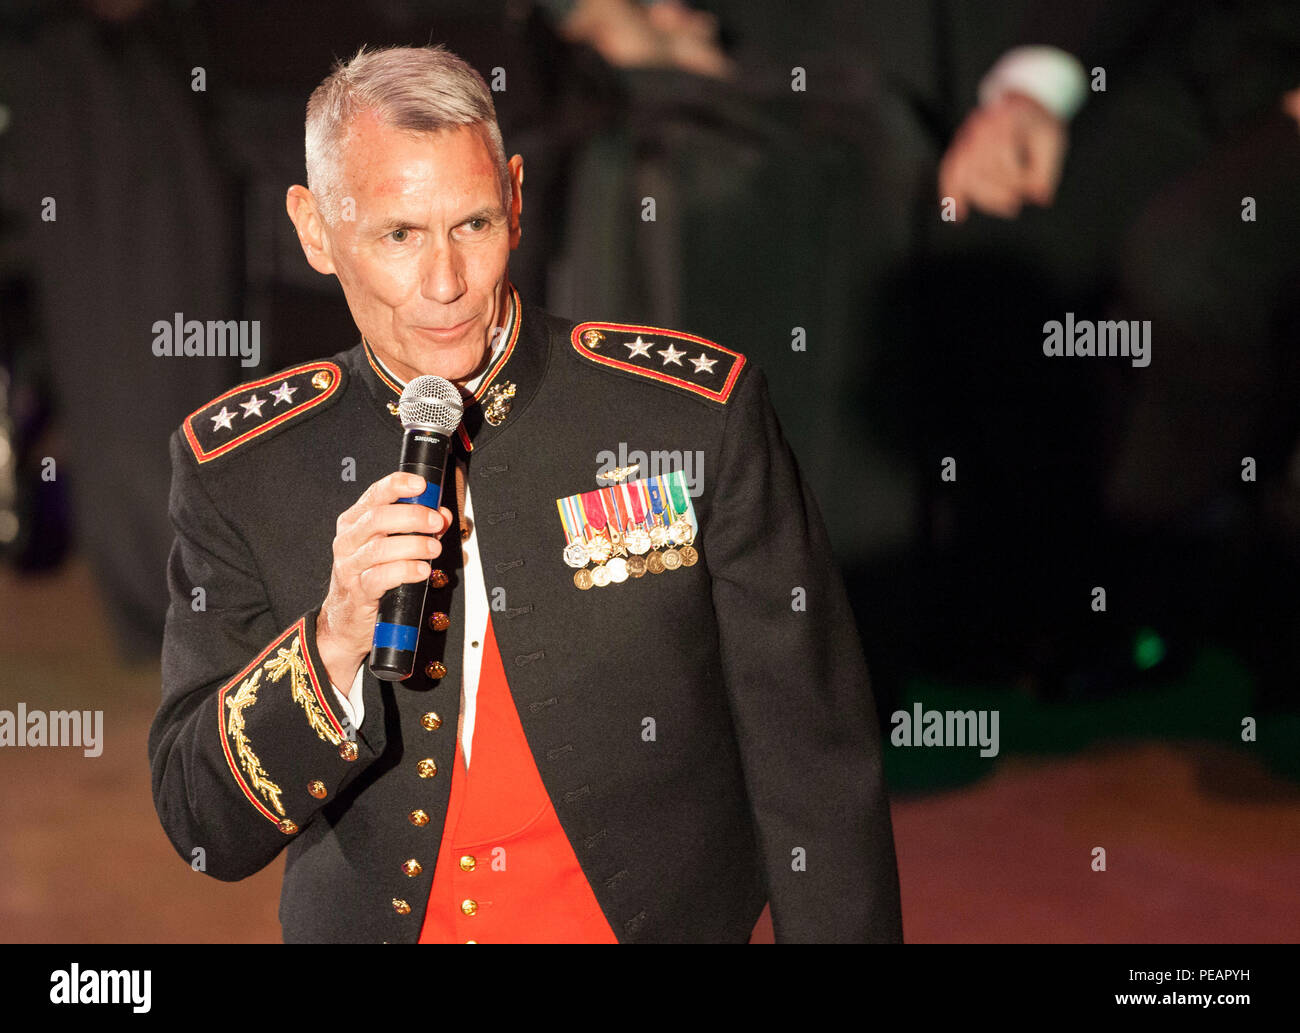 U.S. Marine Lt. Gen. Rex C. McMillian, Commander of Marine Forces Reserve and Marine Forces North, gives a speech during the celebration of the 240th U.S. Marine Corps Birthday Ball at Mardi Gras World, New Orleans, La., Nov 21, 2015. This year’s celebration honors those past, present, and future Marines throughout history and marks the 240th Marine Corps Birthday since its founding on Nov. 10, 1775. (U.S. Marine Corps photo by Kimberly Aguirre/Released) Stock Photo